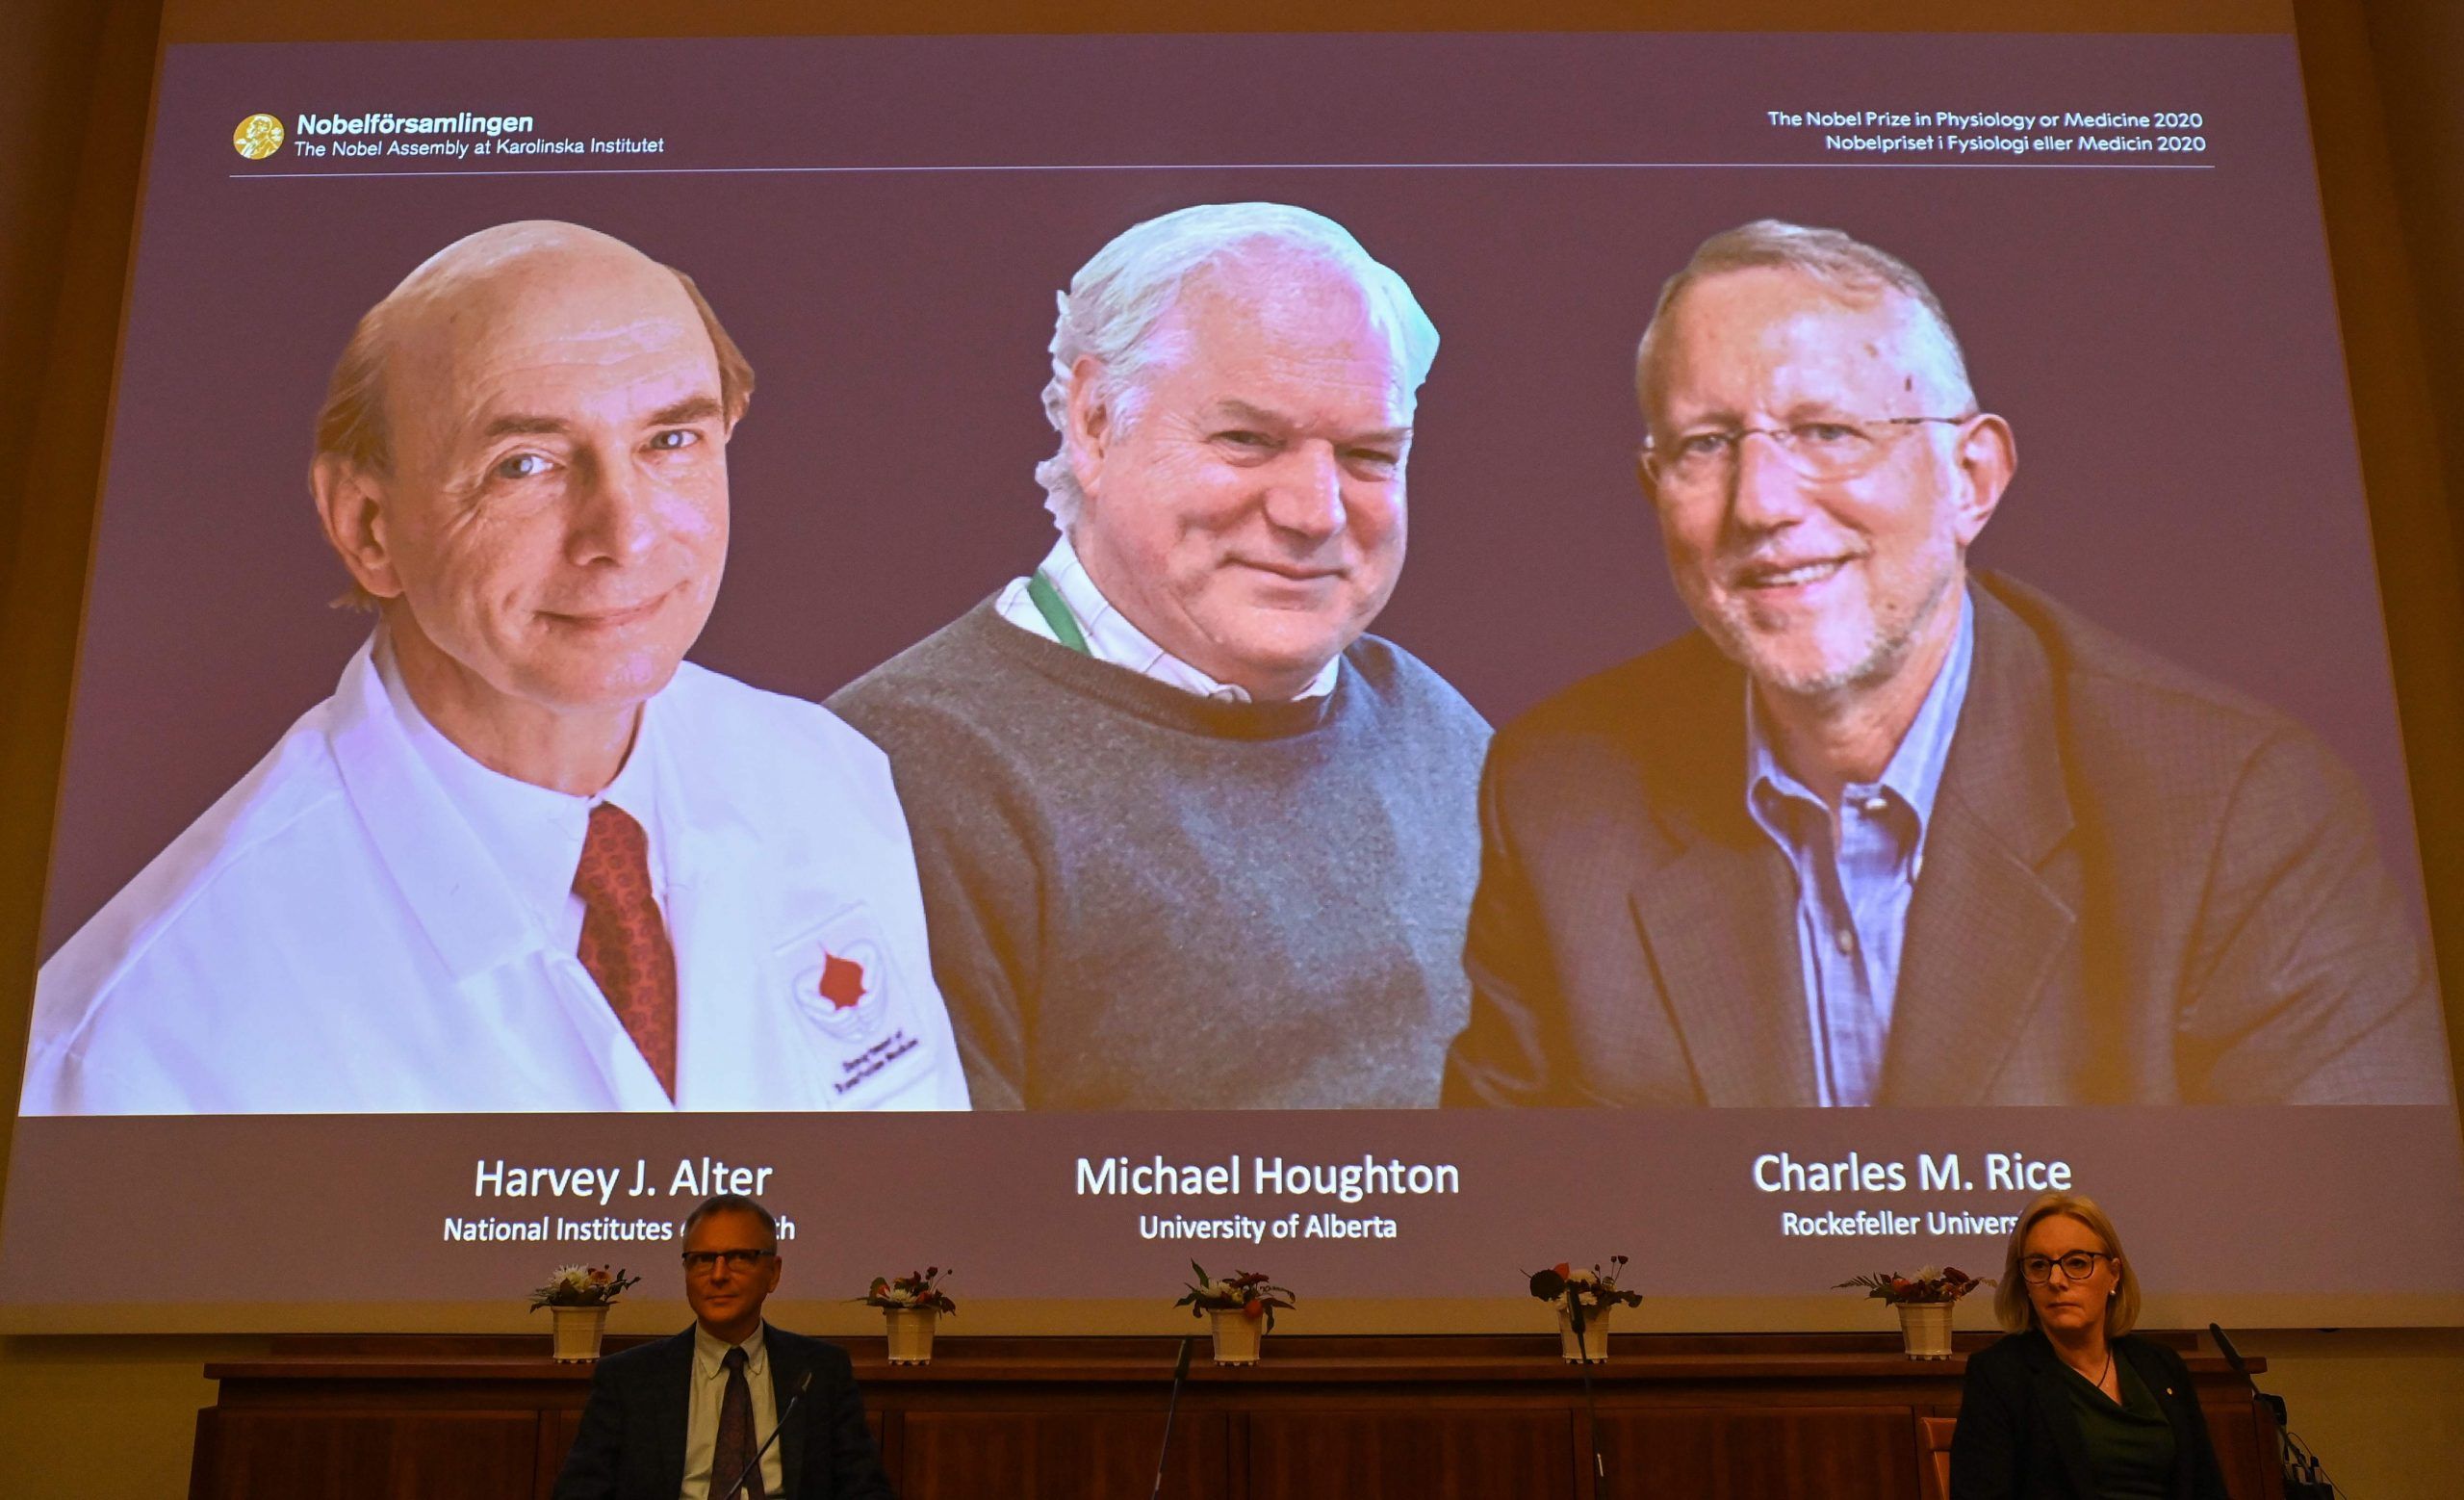 Nobel Committee members Patrik Ernfors (L) and Gunilla Karlsson Hedestam sit in front of a screen displaying the winners of the 2020 Nobel Prize in Physiology or Medicine (L-R) American Harvey Alter, Briton Michael Houghton and American Charles Rice during a press conference at the Karolinska Institute in Stockholm, Sweden, on October 5, 2020. - Americans Harvey Alter and Charles Rice together with Briton Michael Houghton won the Nobel Medicine Prize on Monday for the discovery of the Hepatitis C virus, the Nobel jury said. 